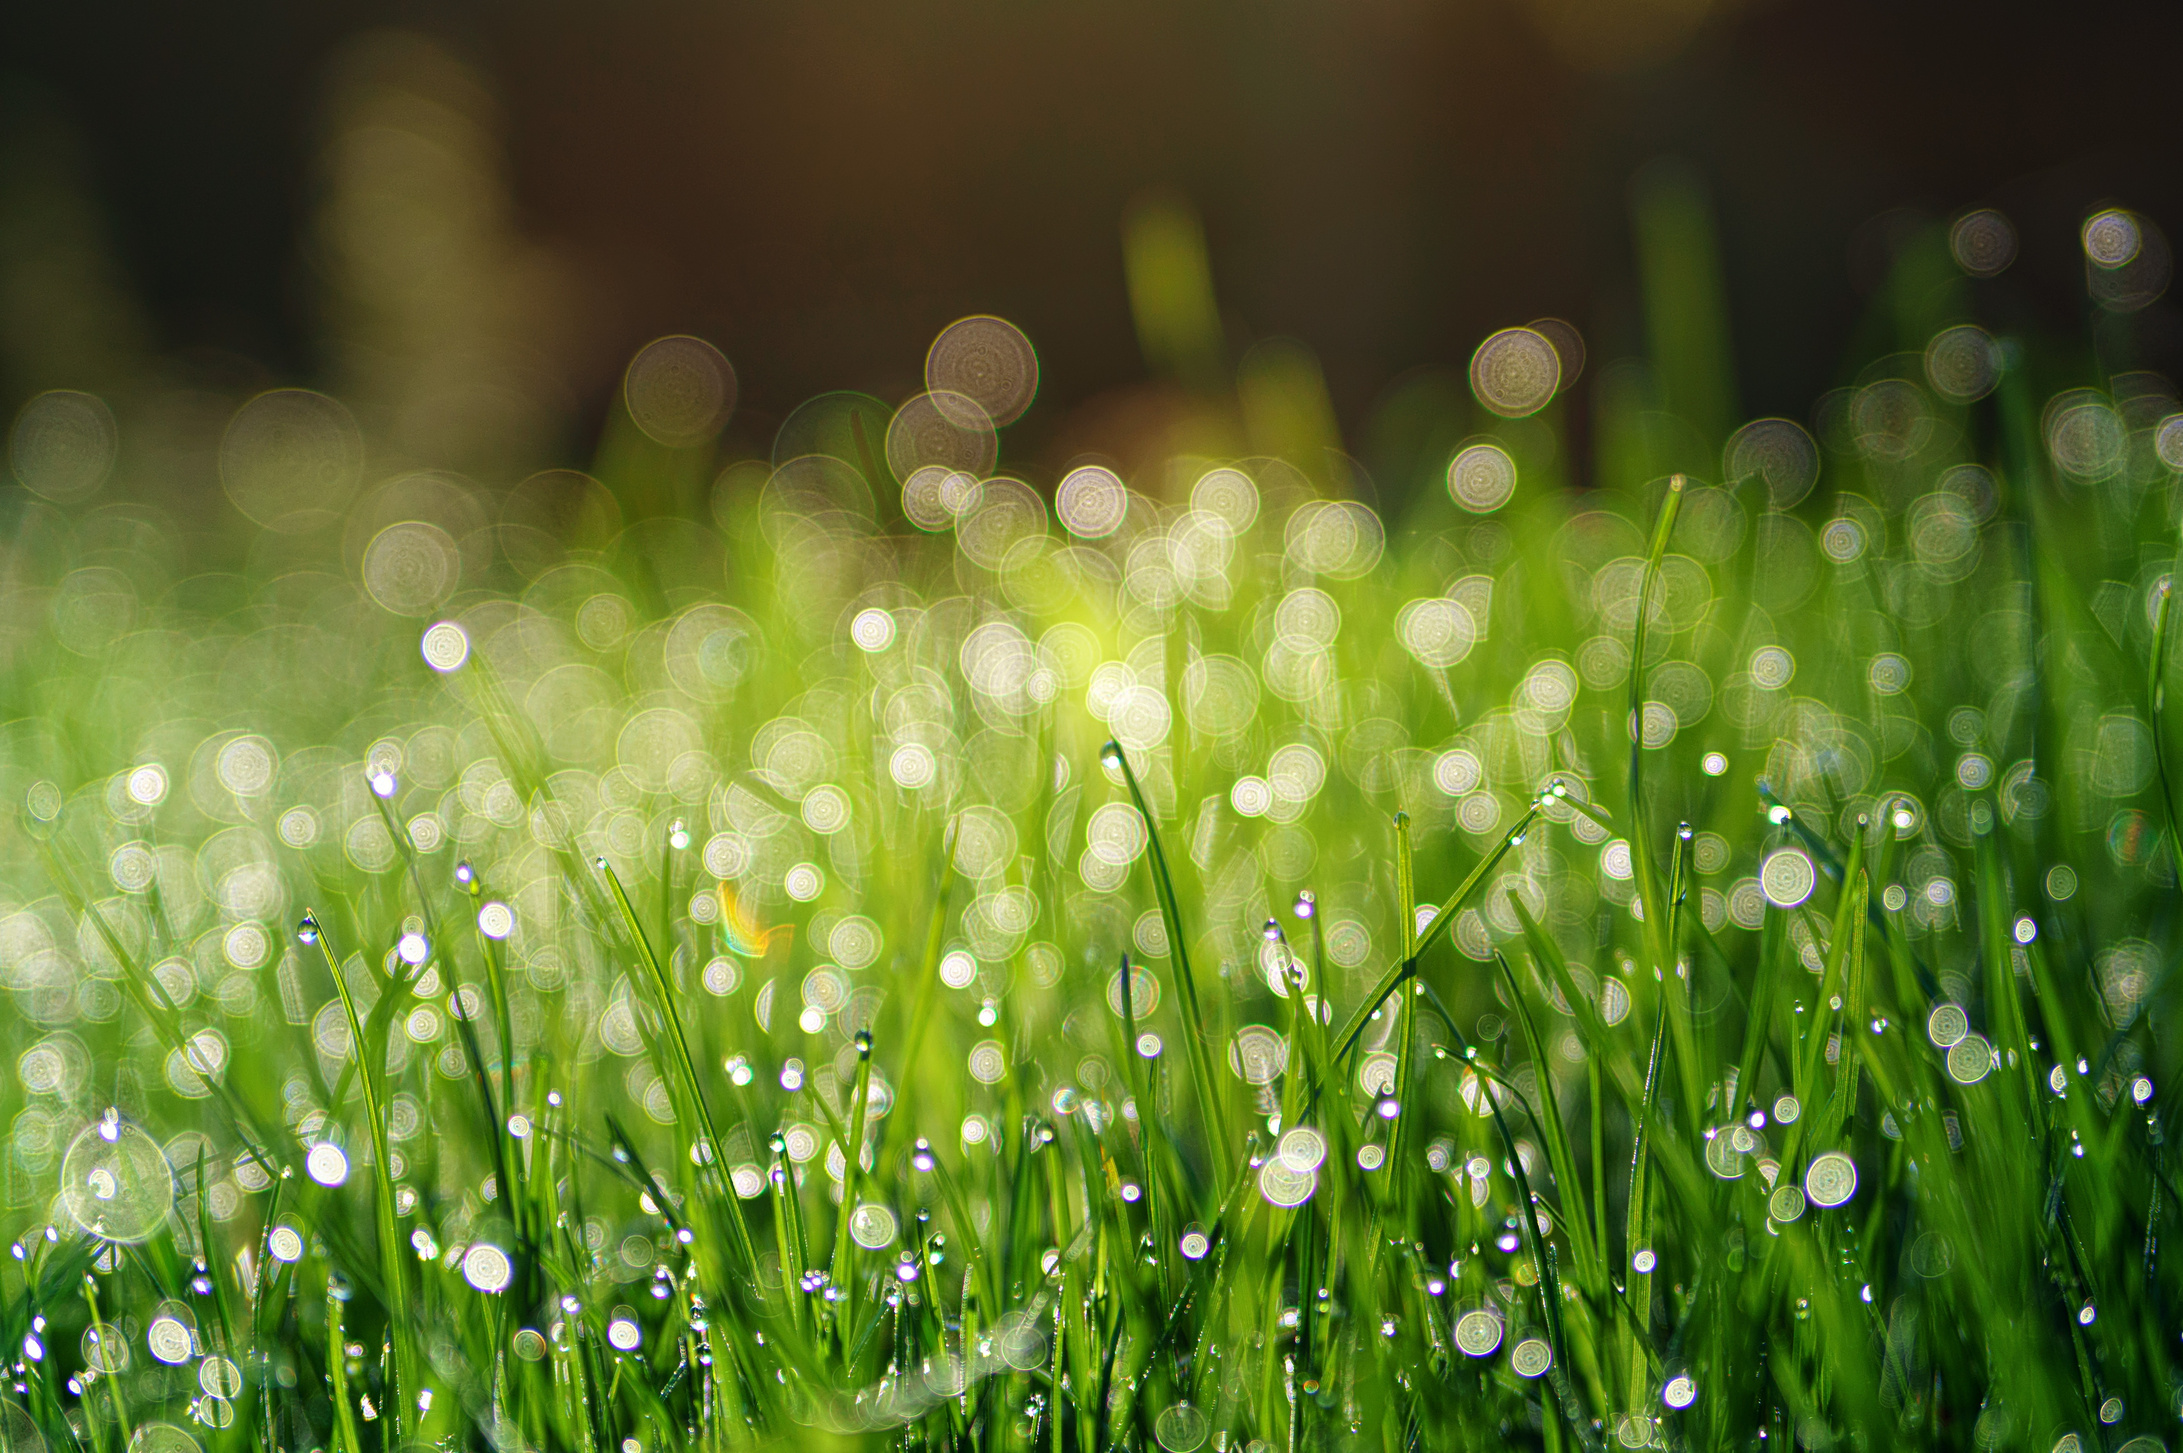 Grass With Dew Drops